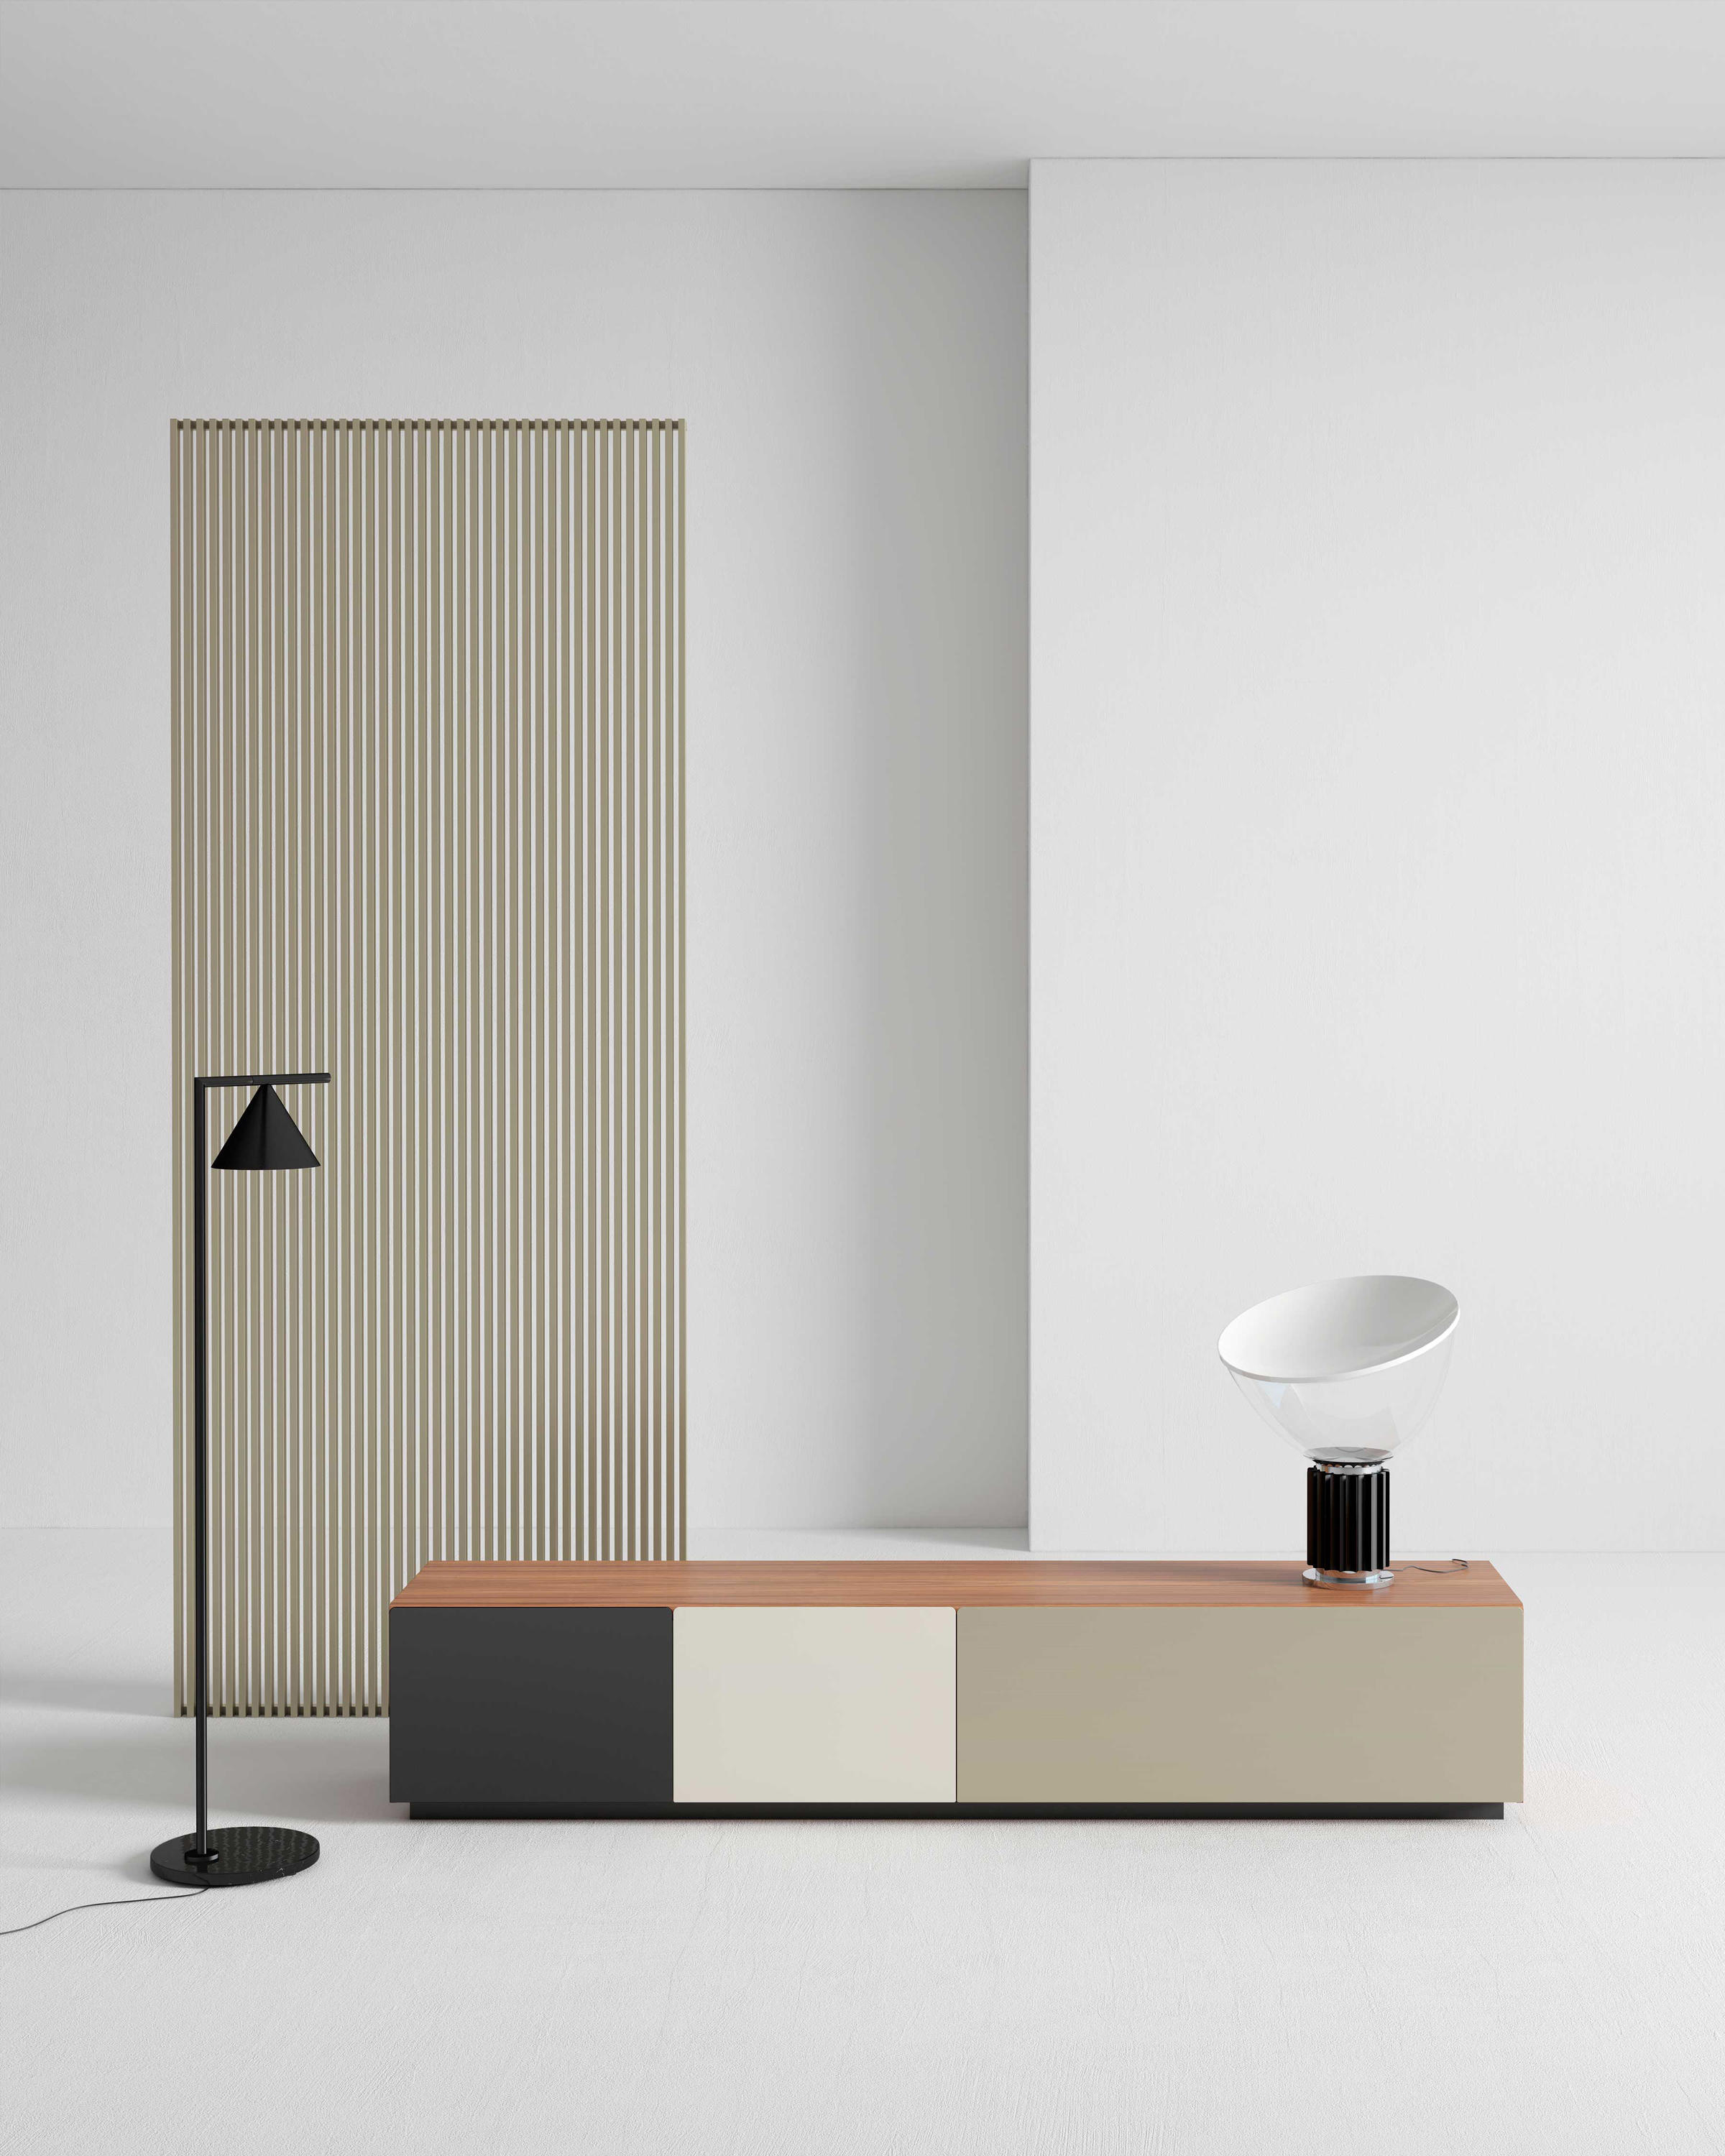 Malmö Collection by Mario Ruiz for Punt